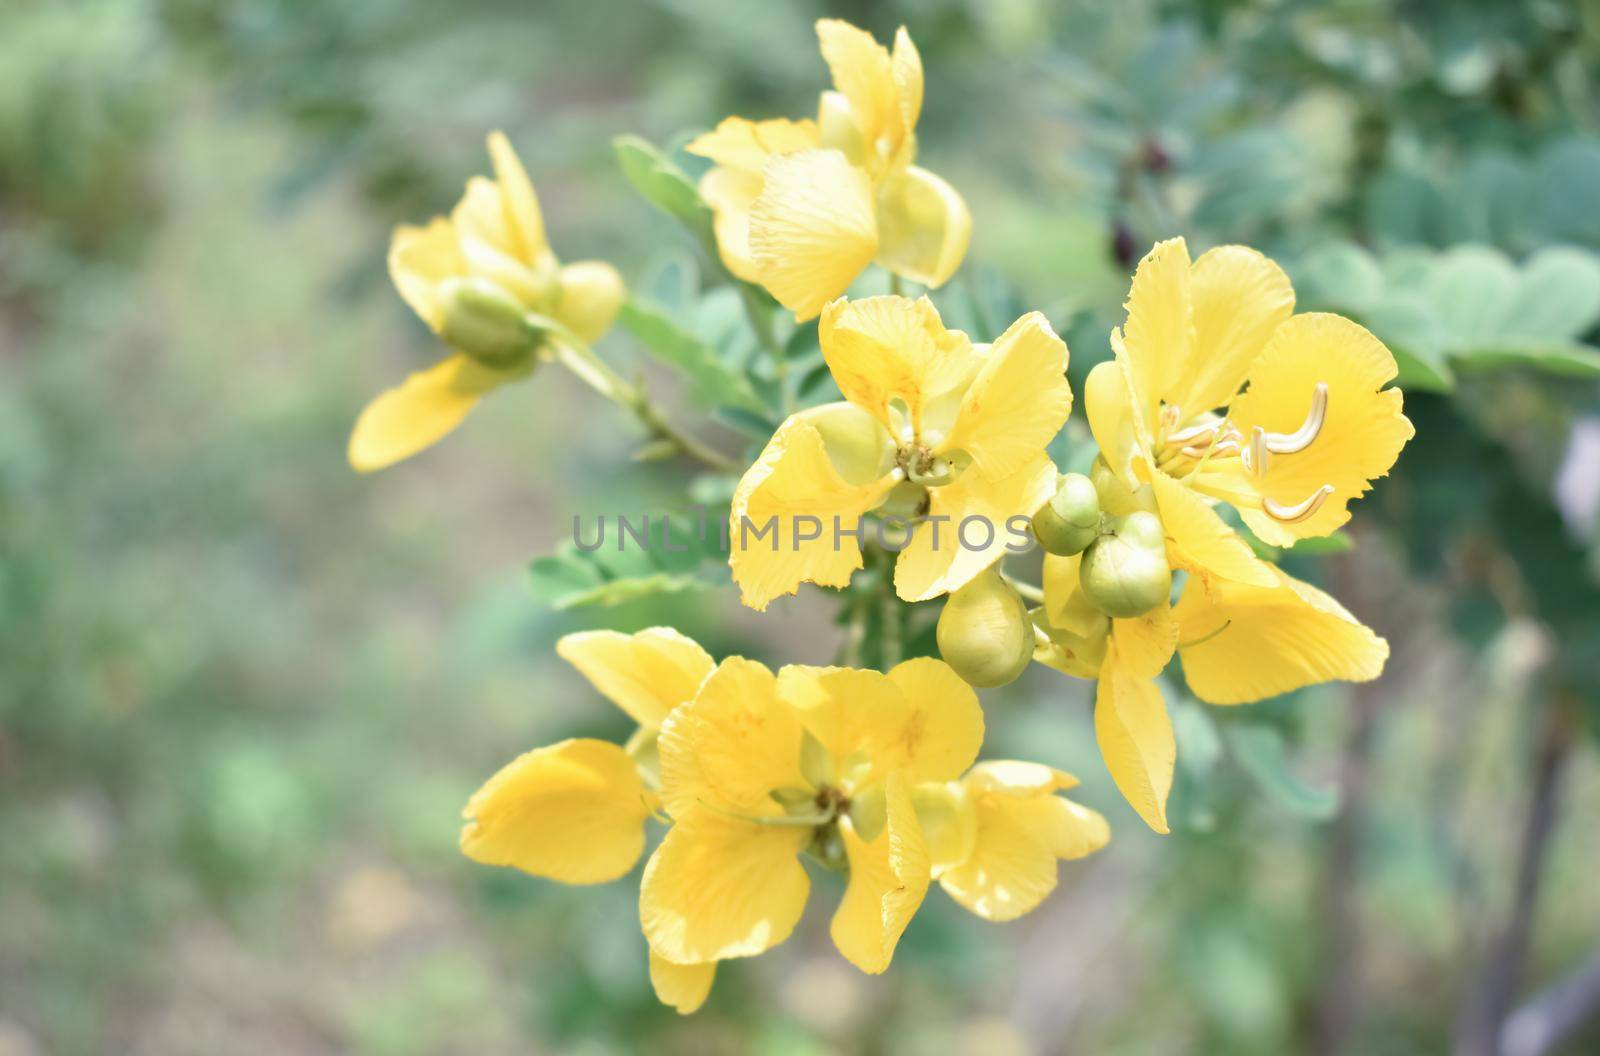 Beautiful yellow trumpet flowers are blooming in a fresh green garden.